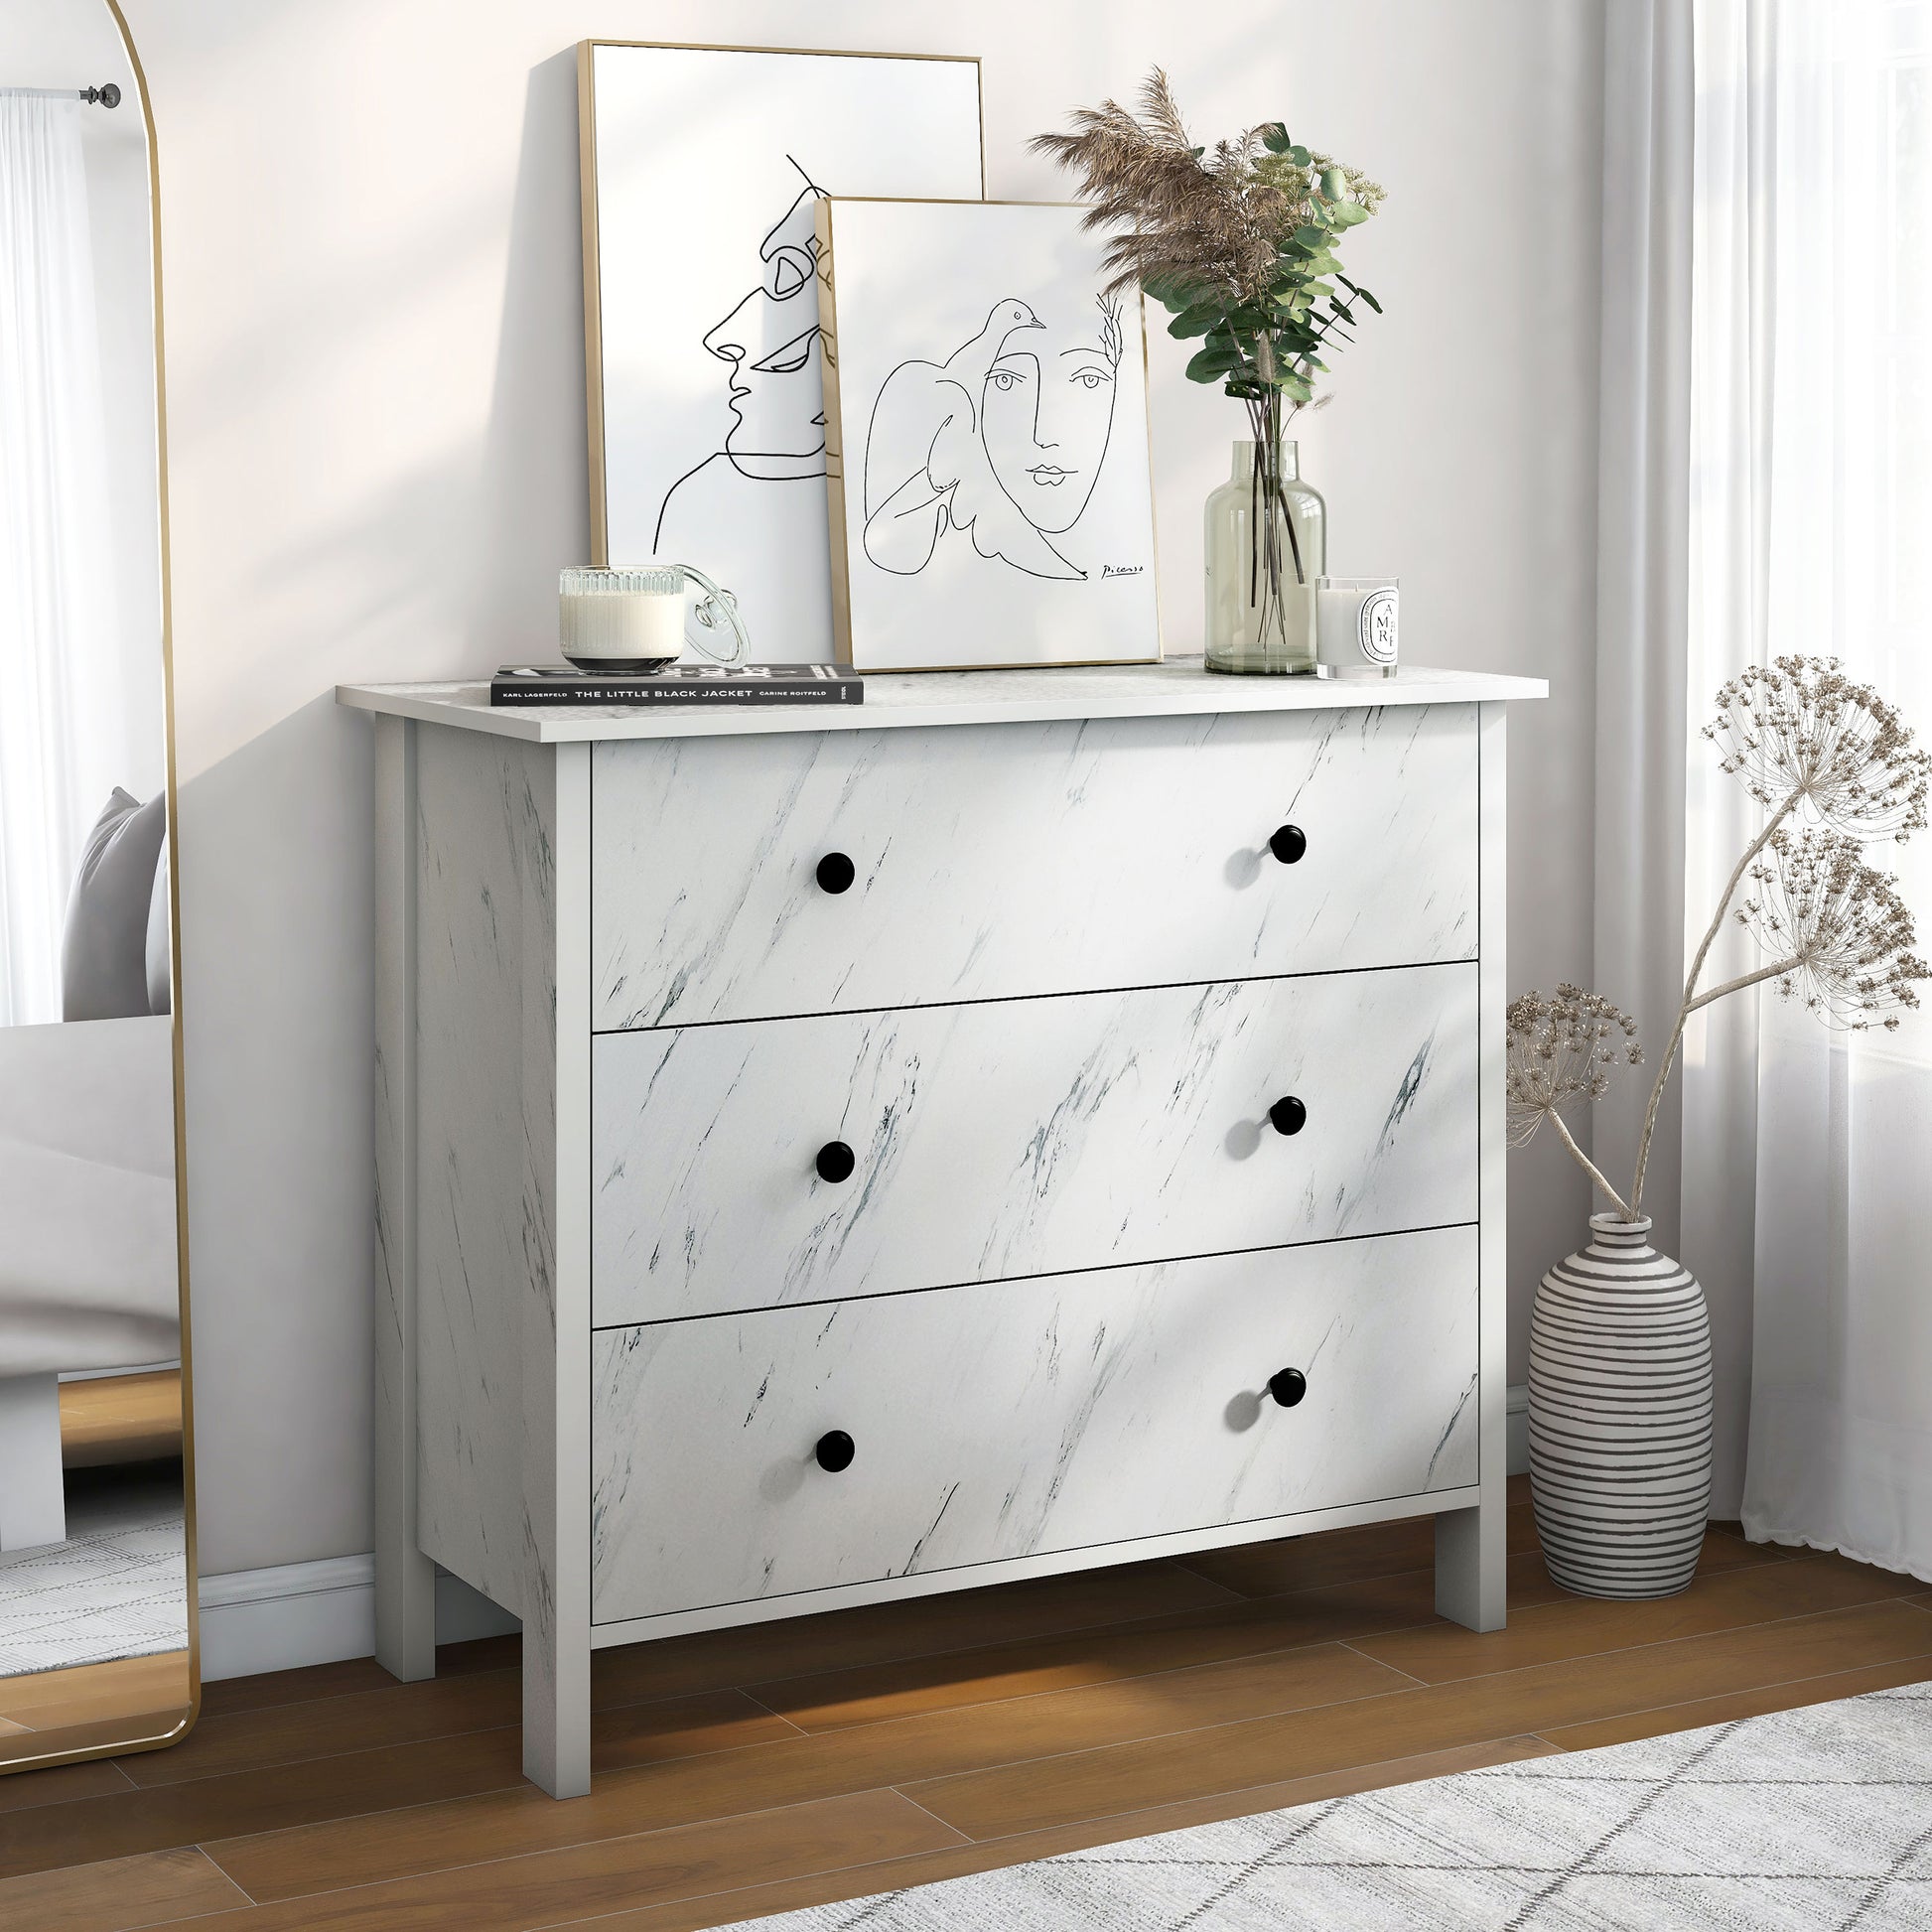 Right angled transitional white faux marble three-drawer youth dresser in a bedroom with accessories